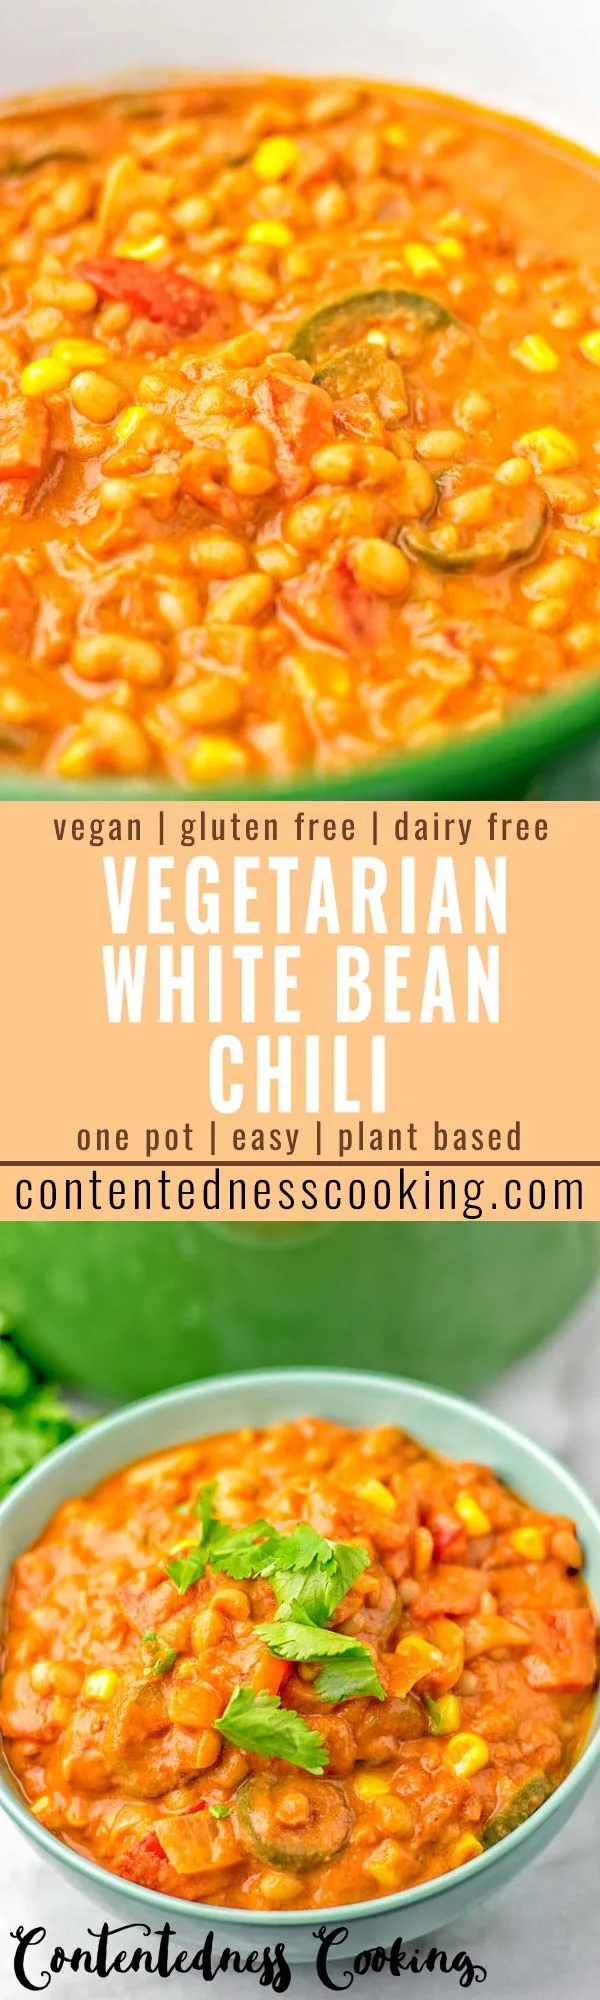 This Vegetarian White Bean Chili is made in one pot and naturally vegan, gluten free. It is super easy to make and packed with fantastic flavors. So amazing for dinner, lunch, meal prep, work lunches and so much more. Try it now and wow yourself #vegan #glutenfree #dairyfree #vegetarian #onepotmeals #chili #dinner #lunch #mealprep #worklunchideas #bugdetmeals #contentednesscooking #familydinnerideas #kidsdishes